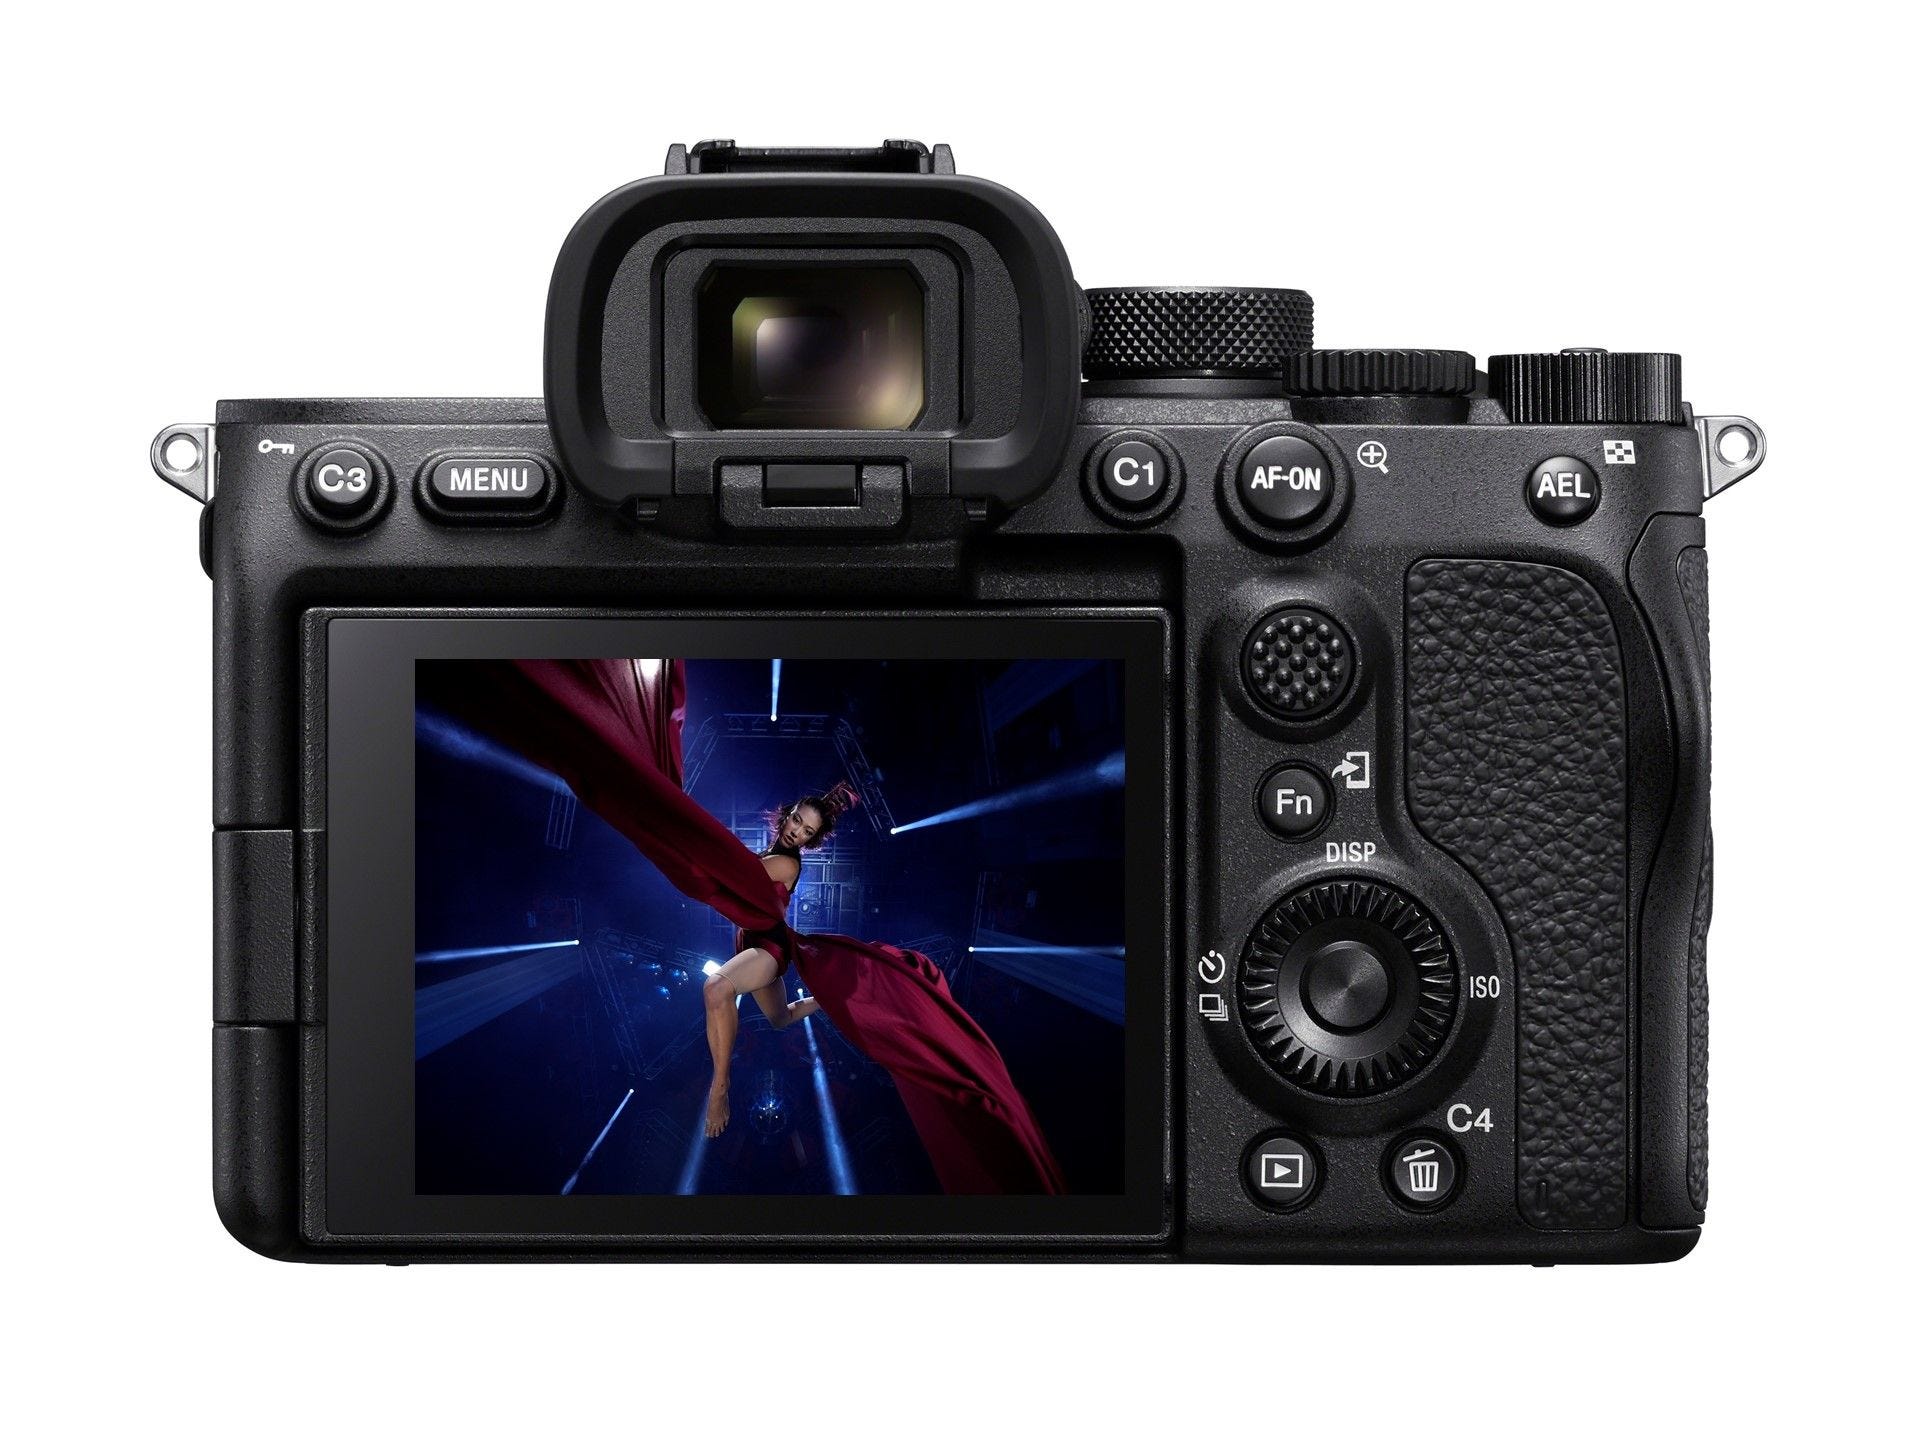 LCD touch screen video mirrorless camera